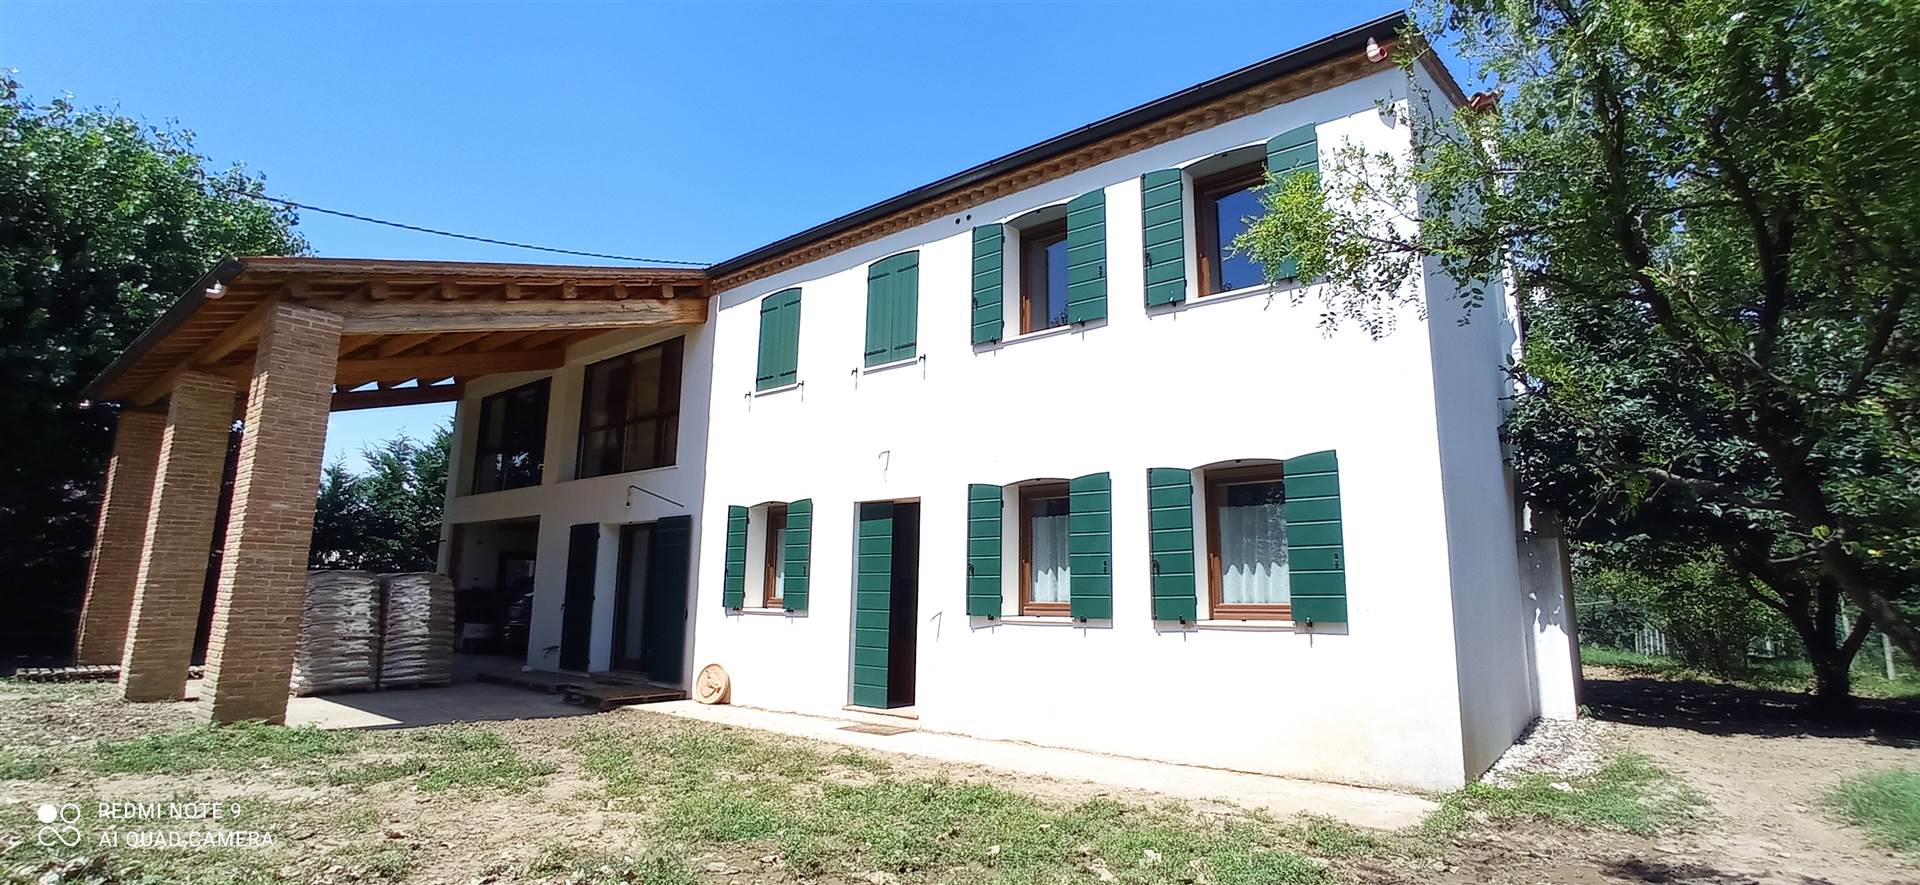 ARCOLE, Villa for sale of 260 Sq. mt., Excellent Condition, Heating Individual heating system, Energetic class: A4, placed at Ground on 2, composed 